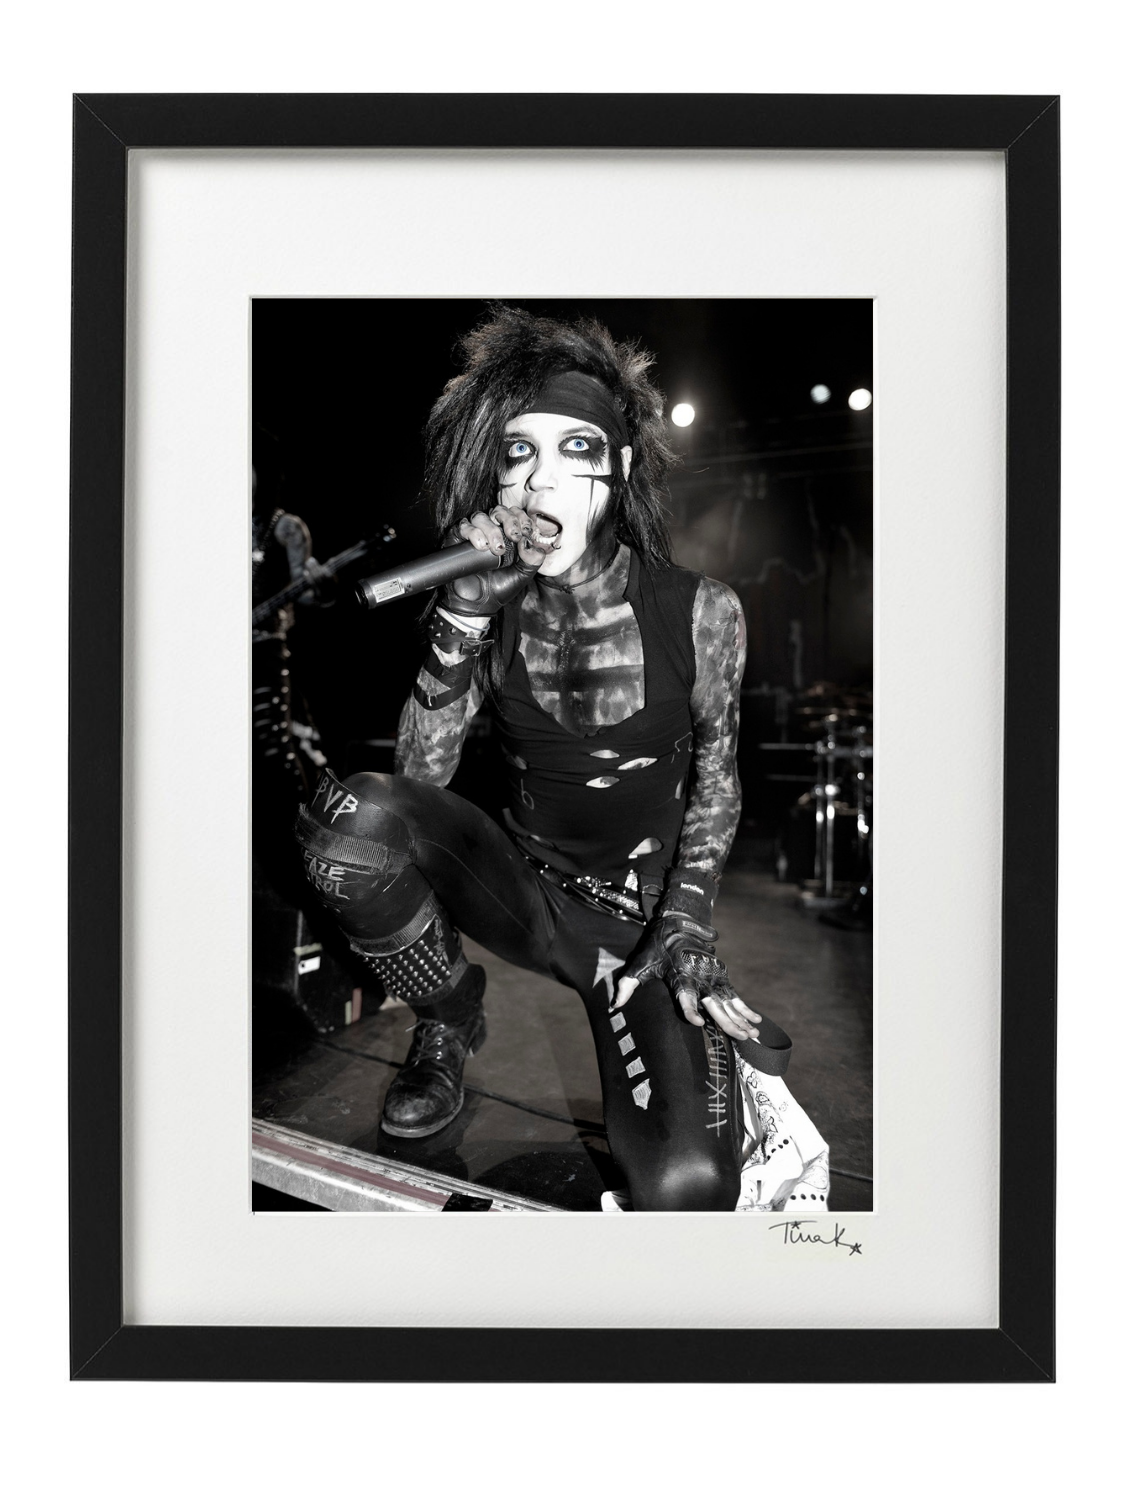 Andy Biersack of Black Veil Brides kneeling on stage with black makeup at the Forum in London 2011. Black and white framed print signed by Tina K Photography.